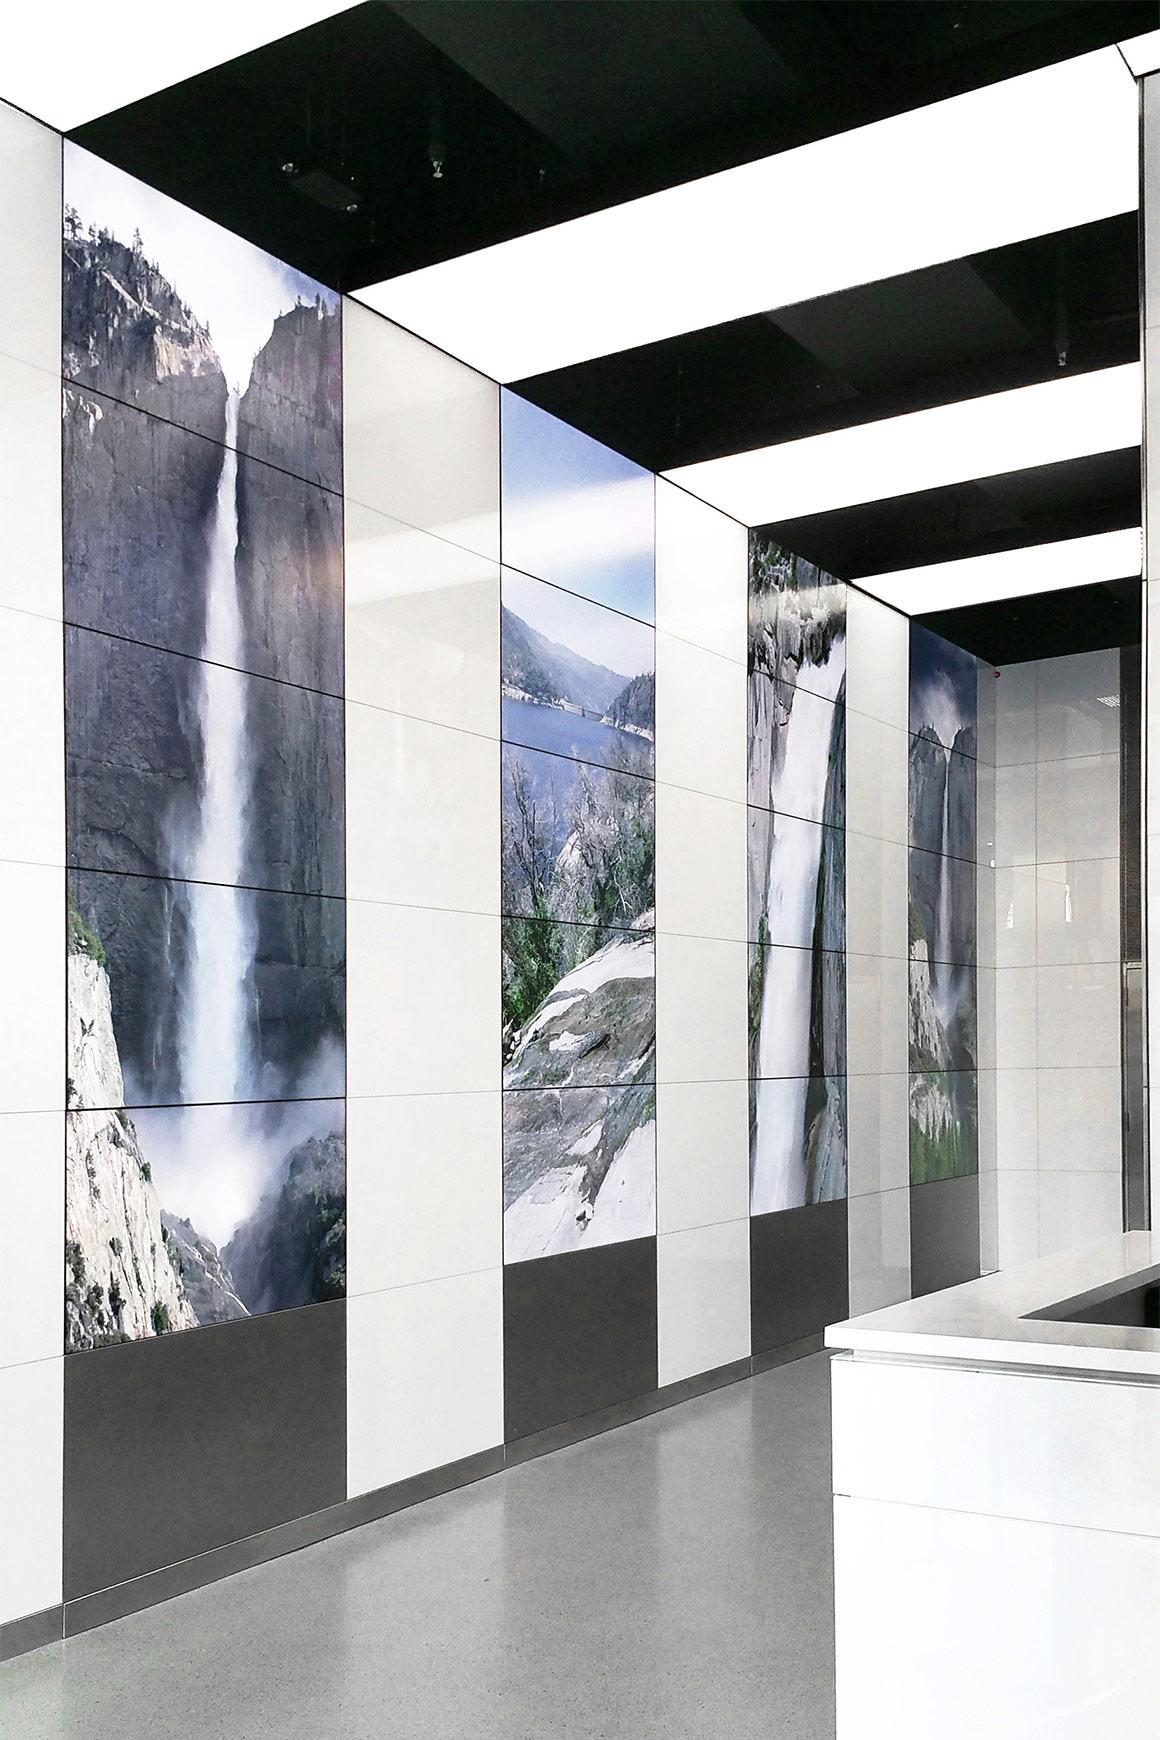 Soho Commercial Lobby NYC Architect Architecture Renovation Renovate Elevecture Glass Custom Digital Display Modular Light Panels